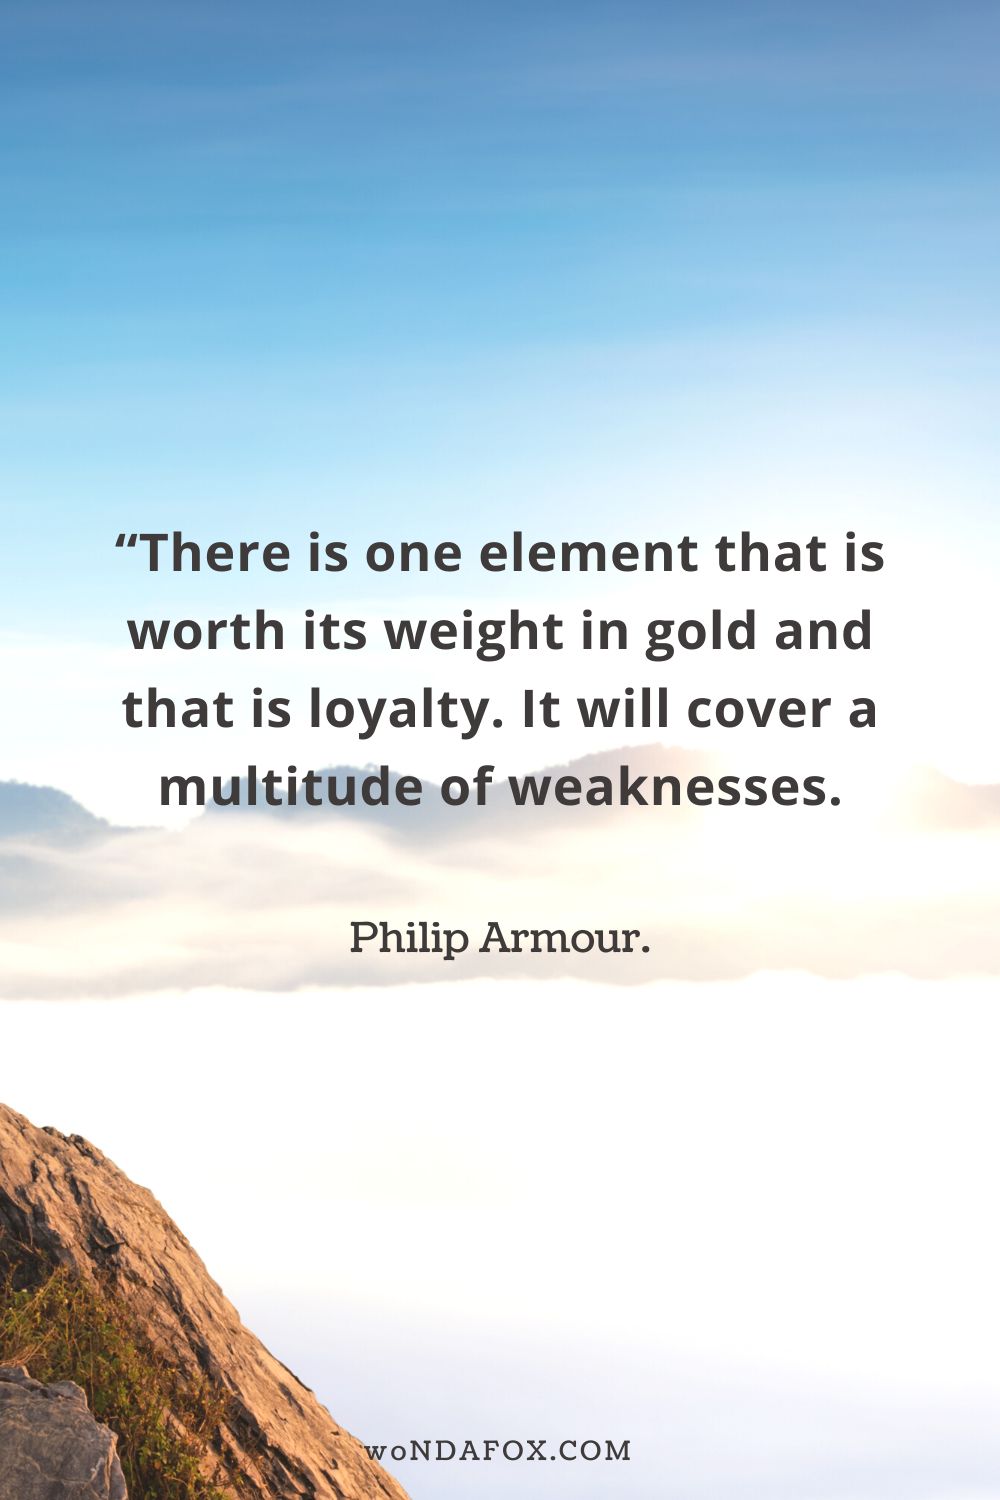 “There is one element that is worth its weight in gold and that is loyalty. It will cover a multitude of weaknesses.”